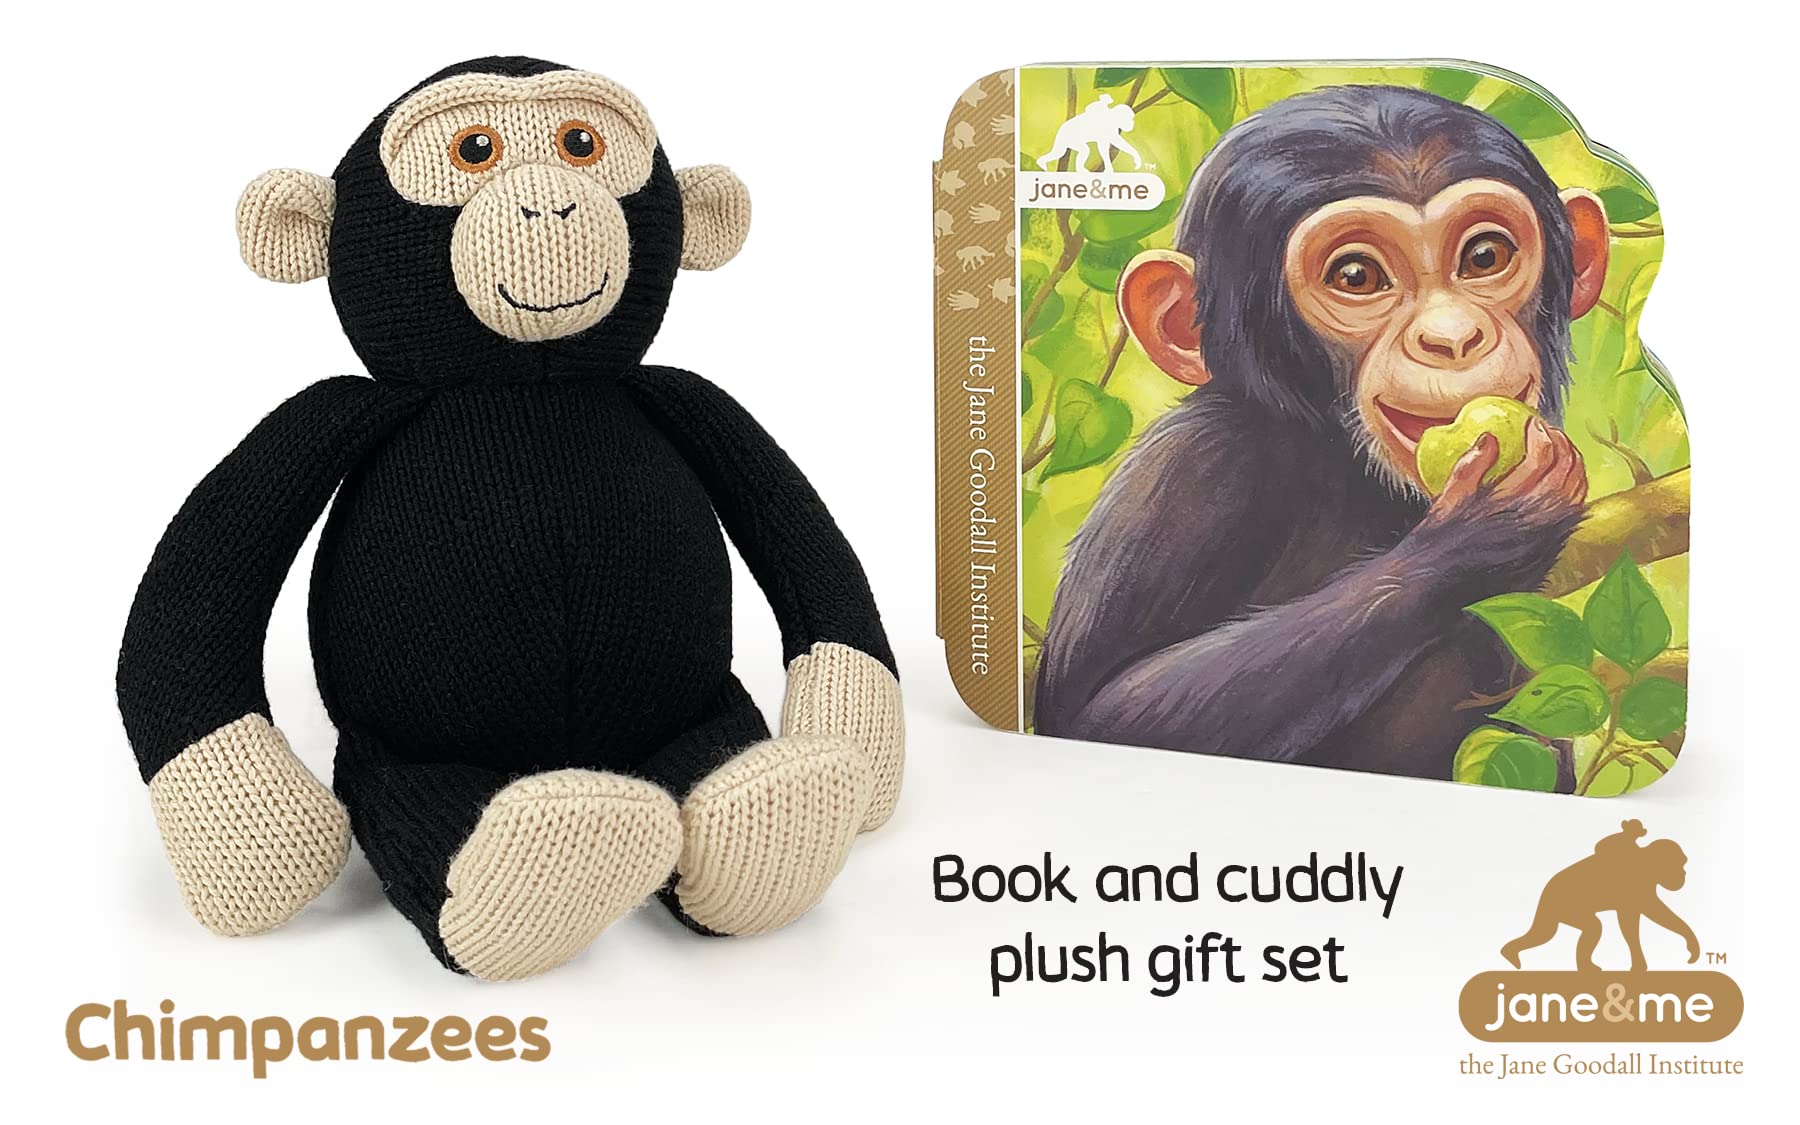 Jane Goodall Chimpanzees Book and Plush Set - Children's Lift-a-Flap Board Book for Babies and Toddlers including Stuffed Chimp, Ages 2-5